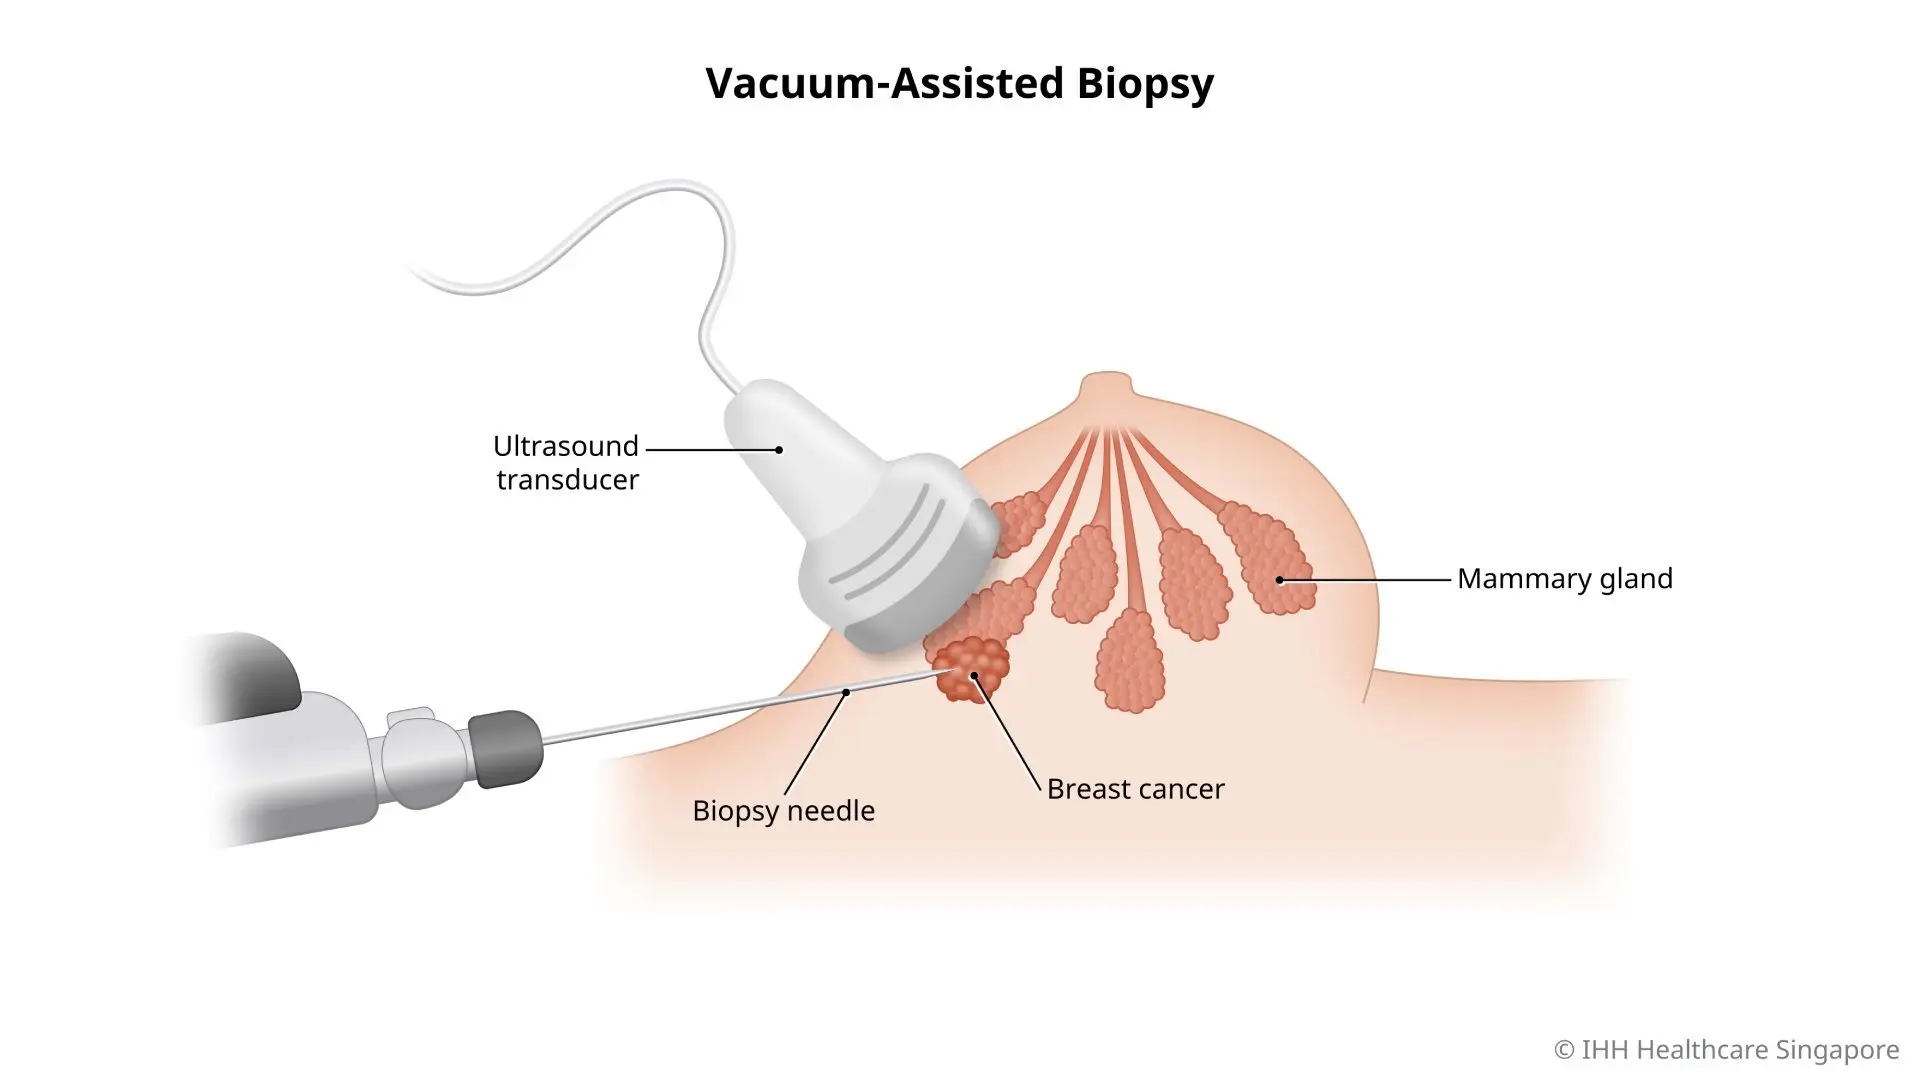 Illustration of a vacuum-assisted biopsy (VAB).